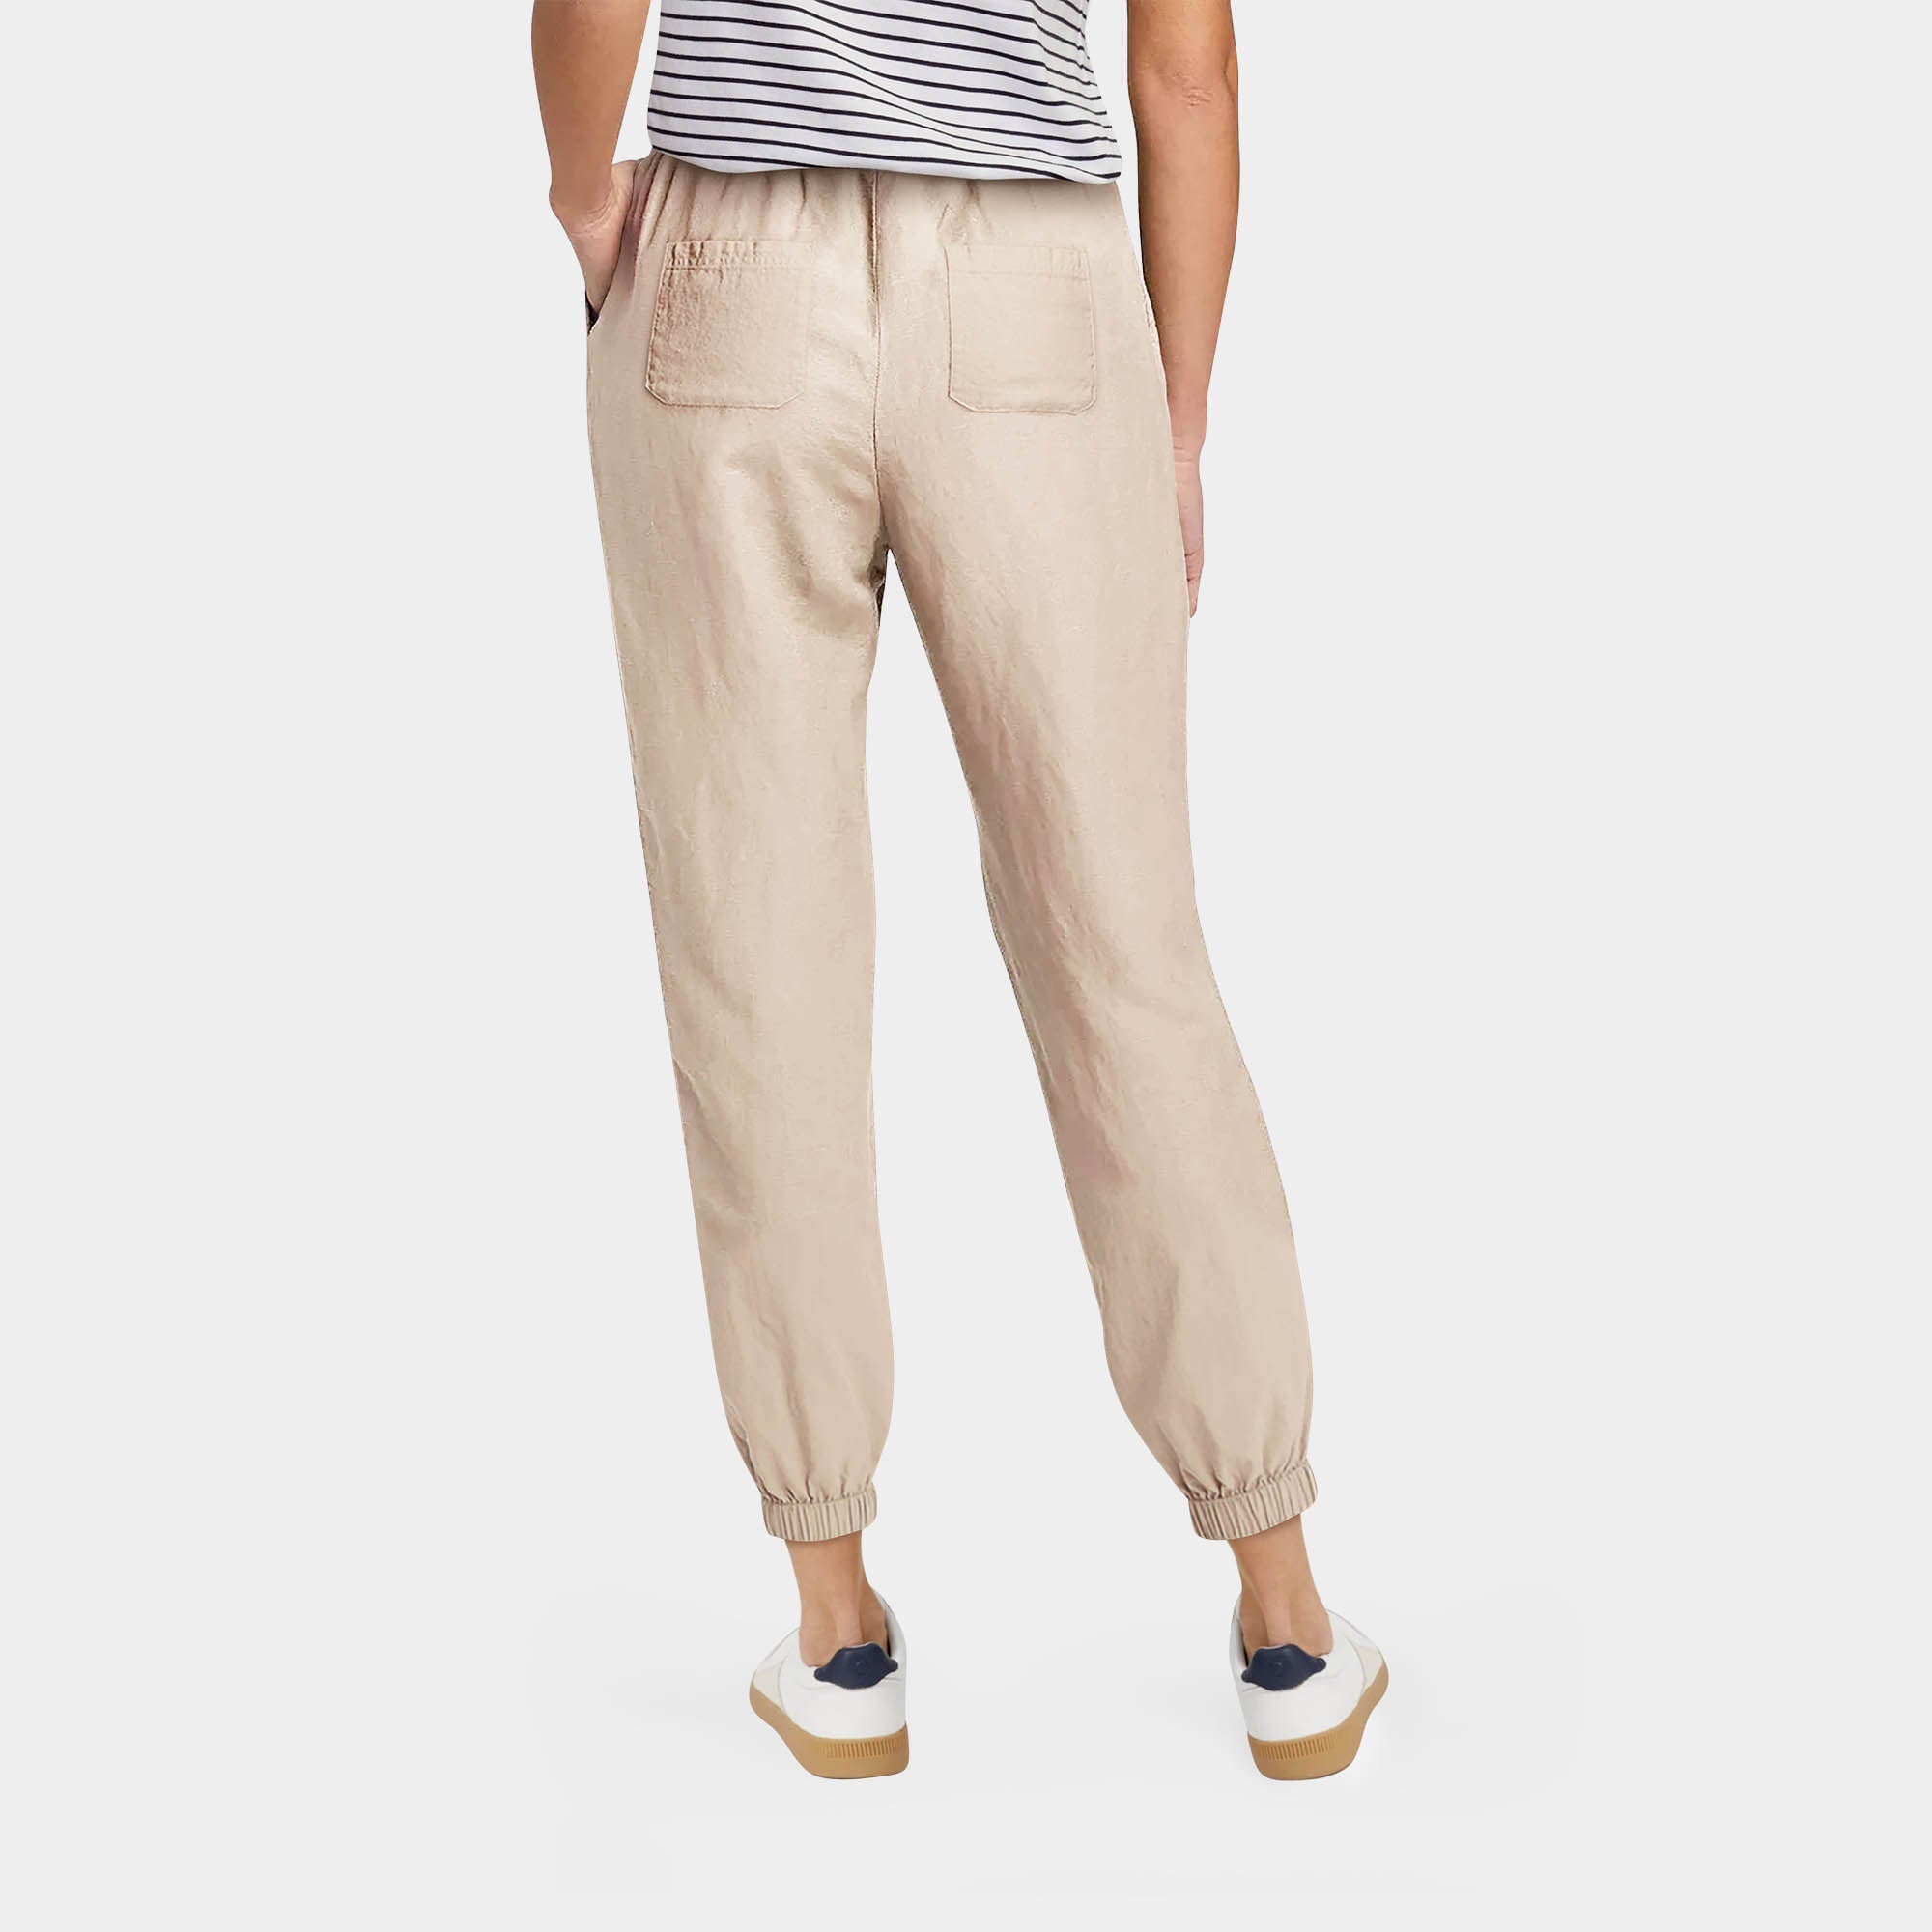 girls_womens_linen pants_trousers_work at home_remote_formal business_casual_missy_old navy_wide leg_plus size_petite_blend pants_cotton_macys_zara_oceanside_beach pants_roxy_romper_drawstring_summer_coverup_resort pants_relax_organic cotton_palazzo_hawaii_cotton_misses_suits_loose_board_clearance_tall_travel_trip_Khaki